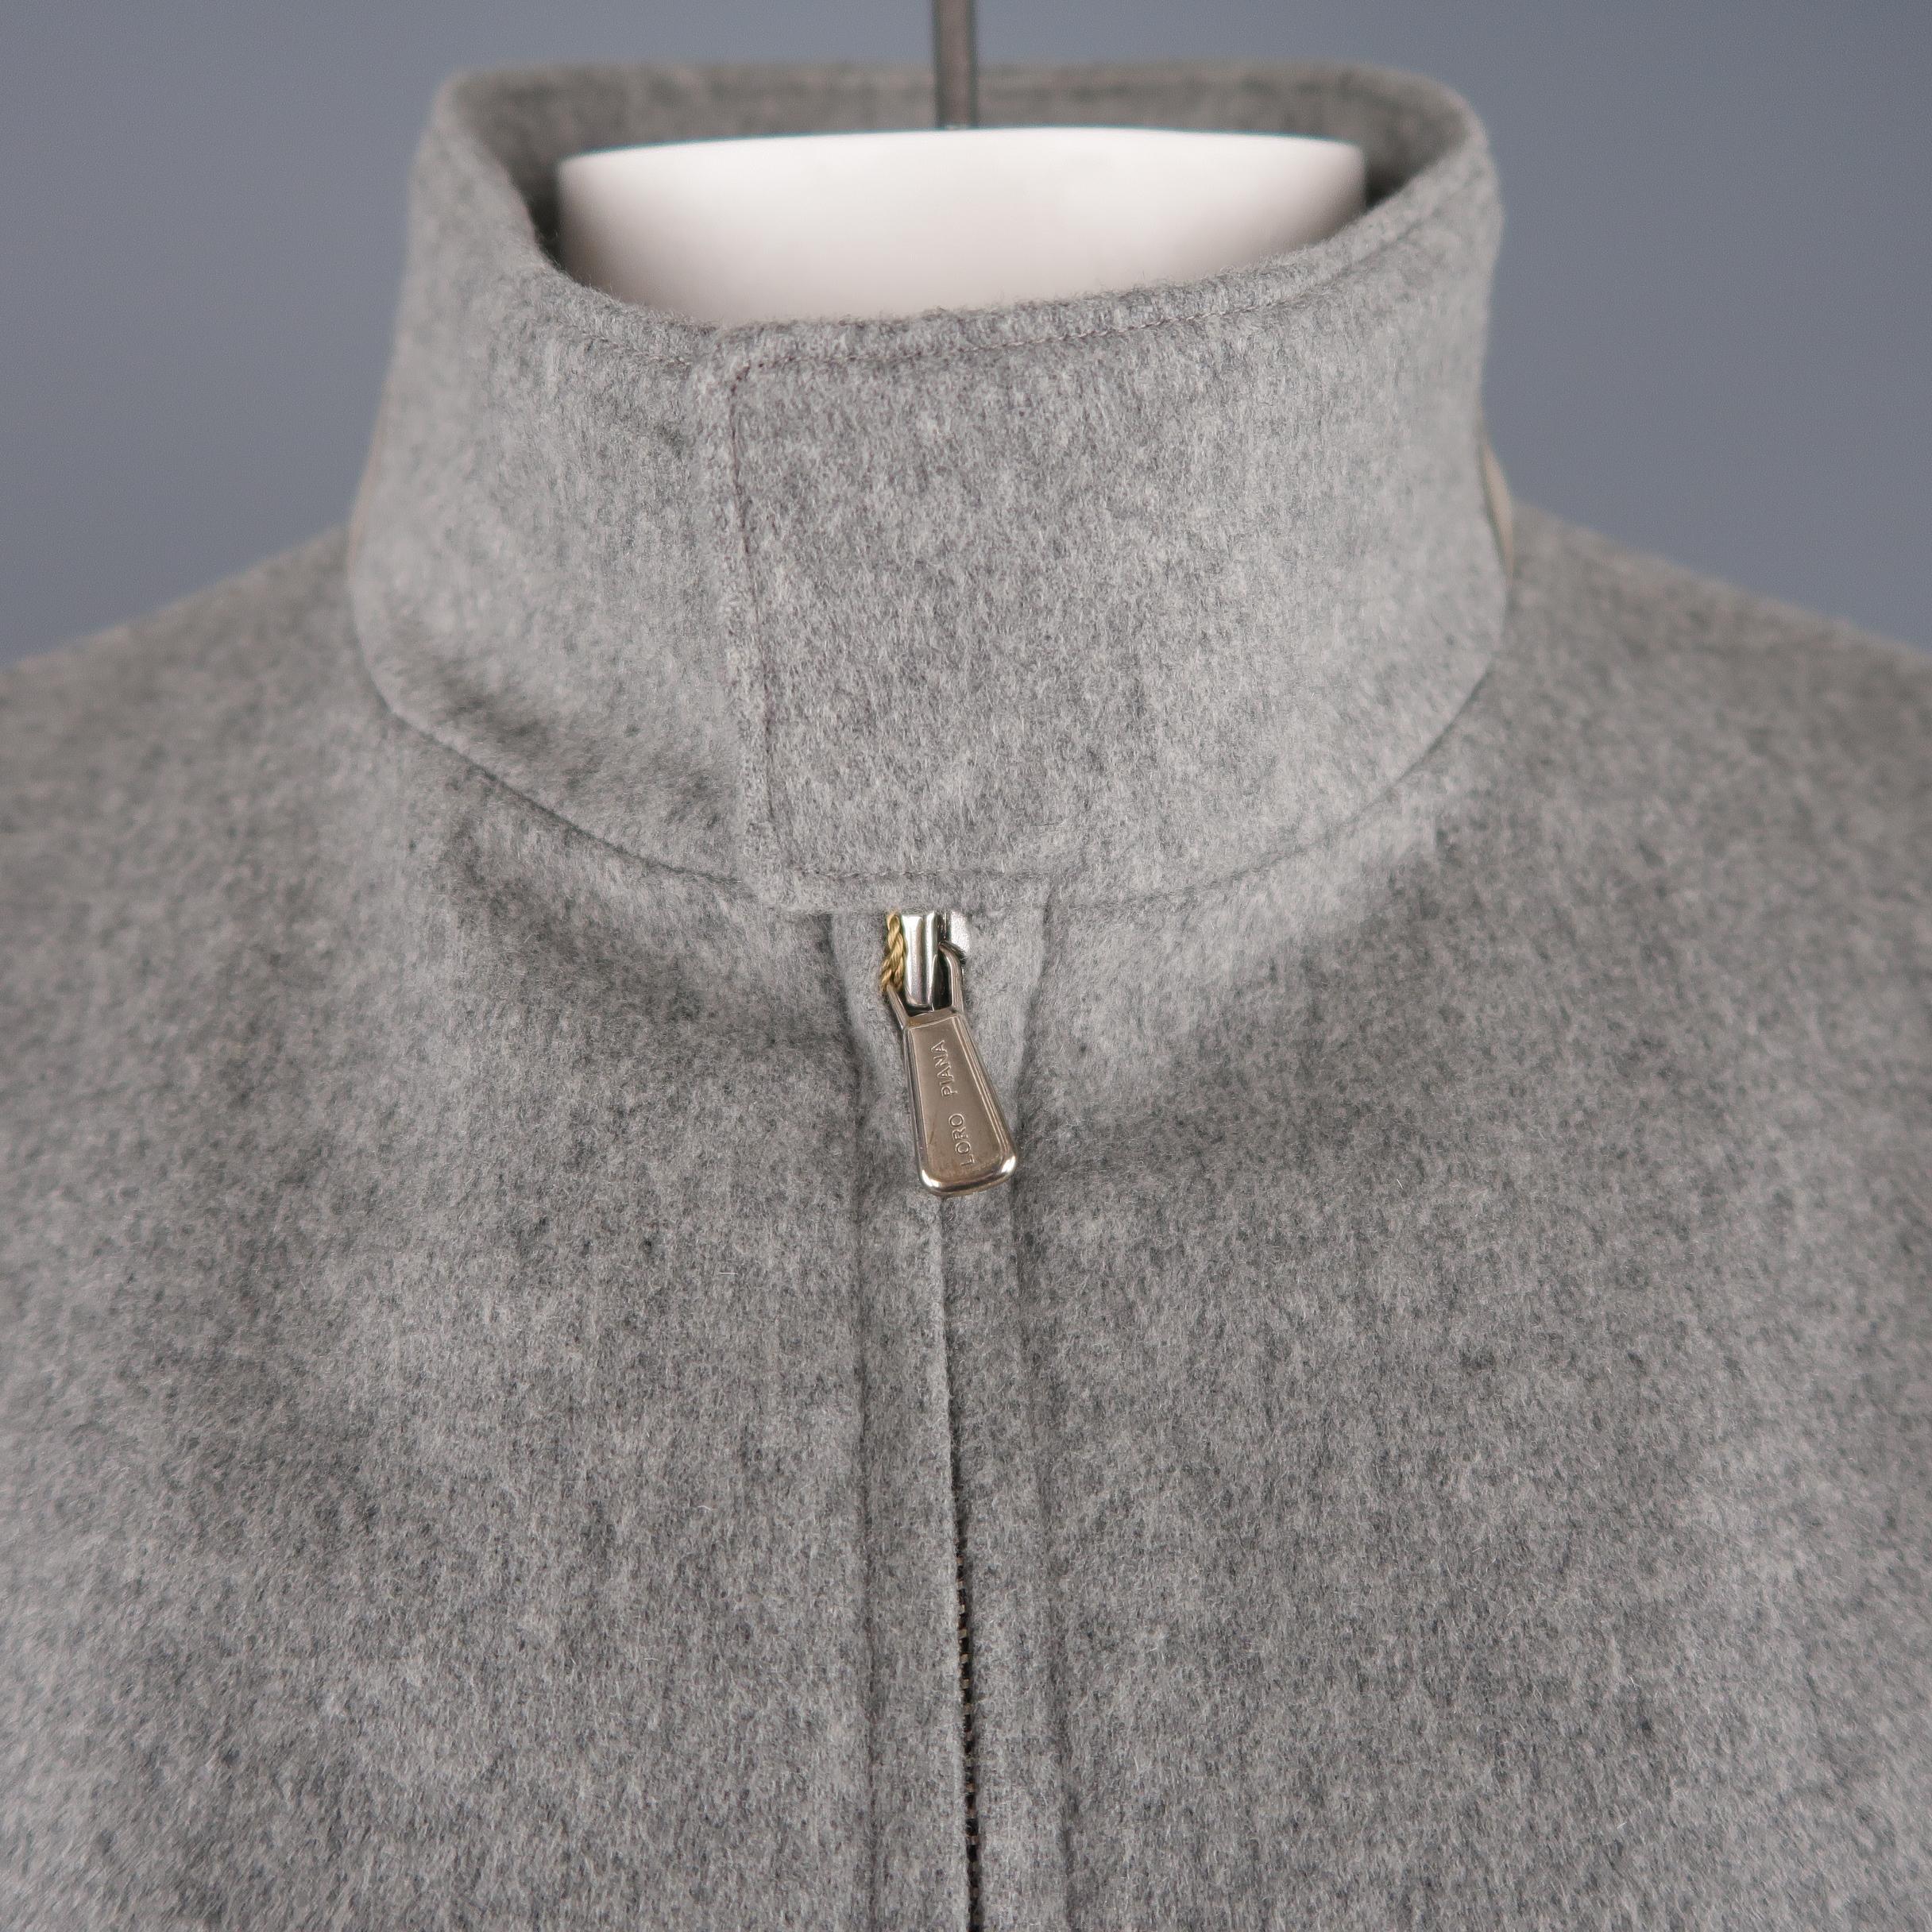 LORO PIANA Storm System bomber jacket comes in light heather gray cashmere with a high collar with suede back, double zip closure, slanted snap flap pockets, and side tabs. Made In Italy. Retail price $ 2,695.00
 
New with Tags.
Marked: L
